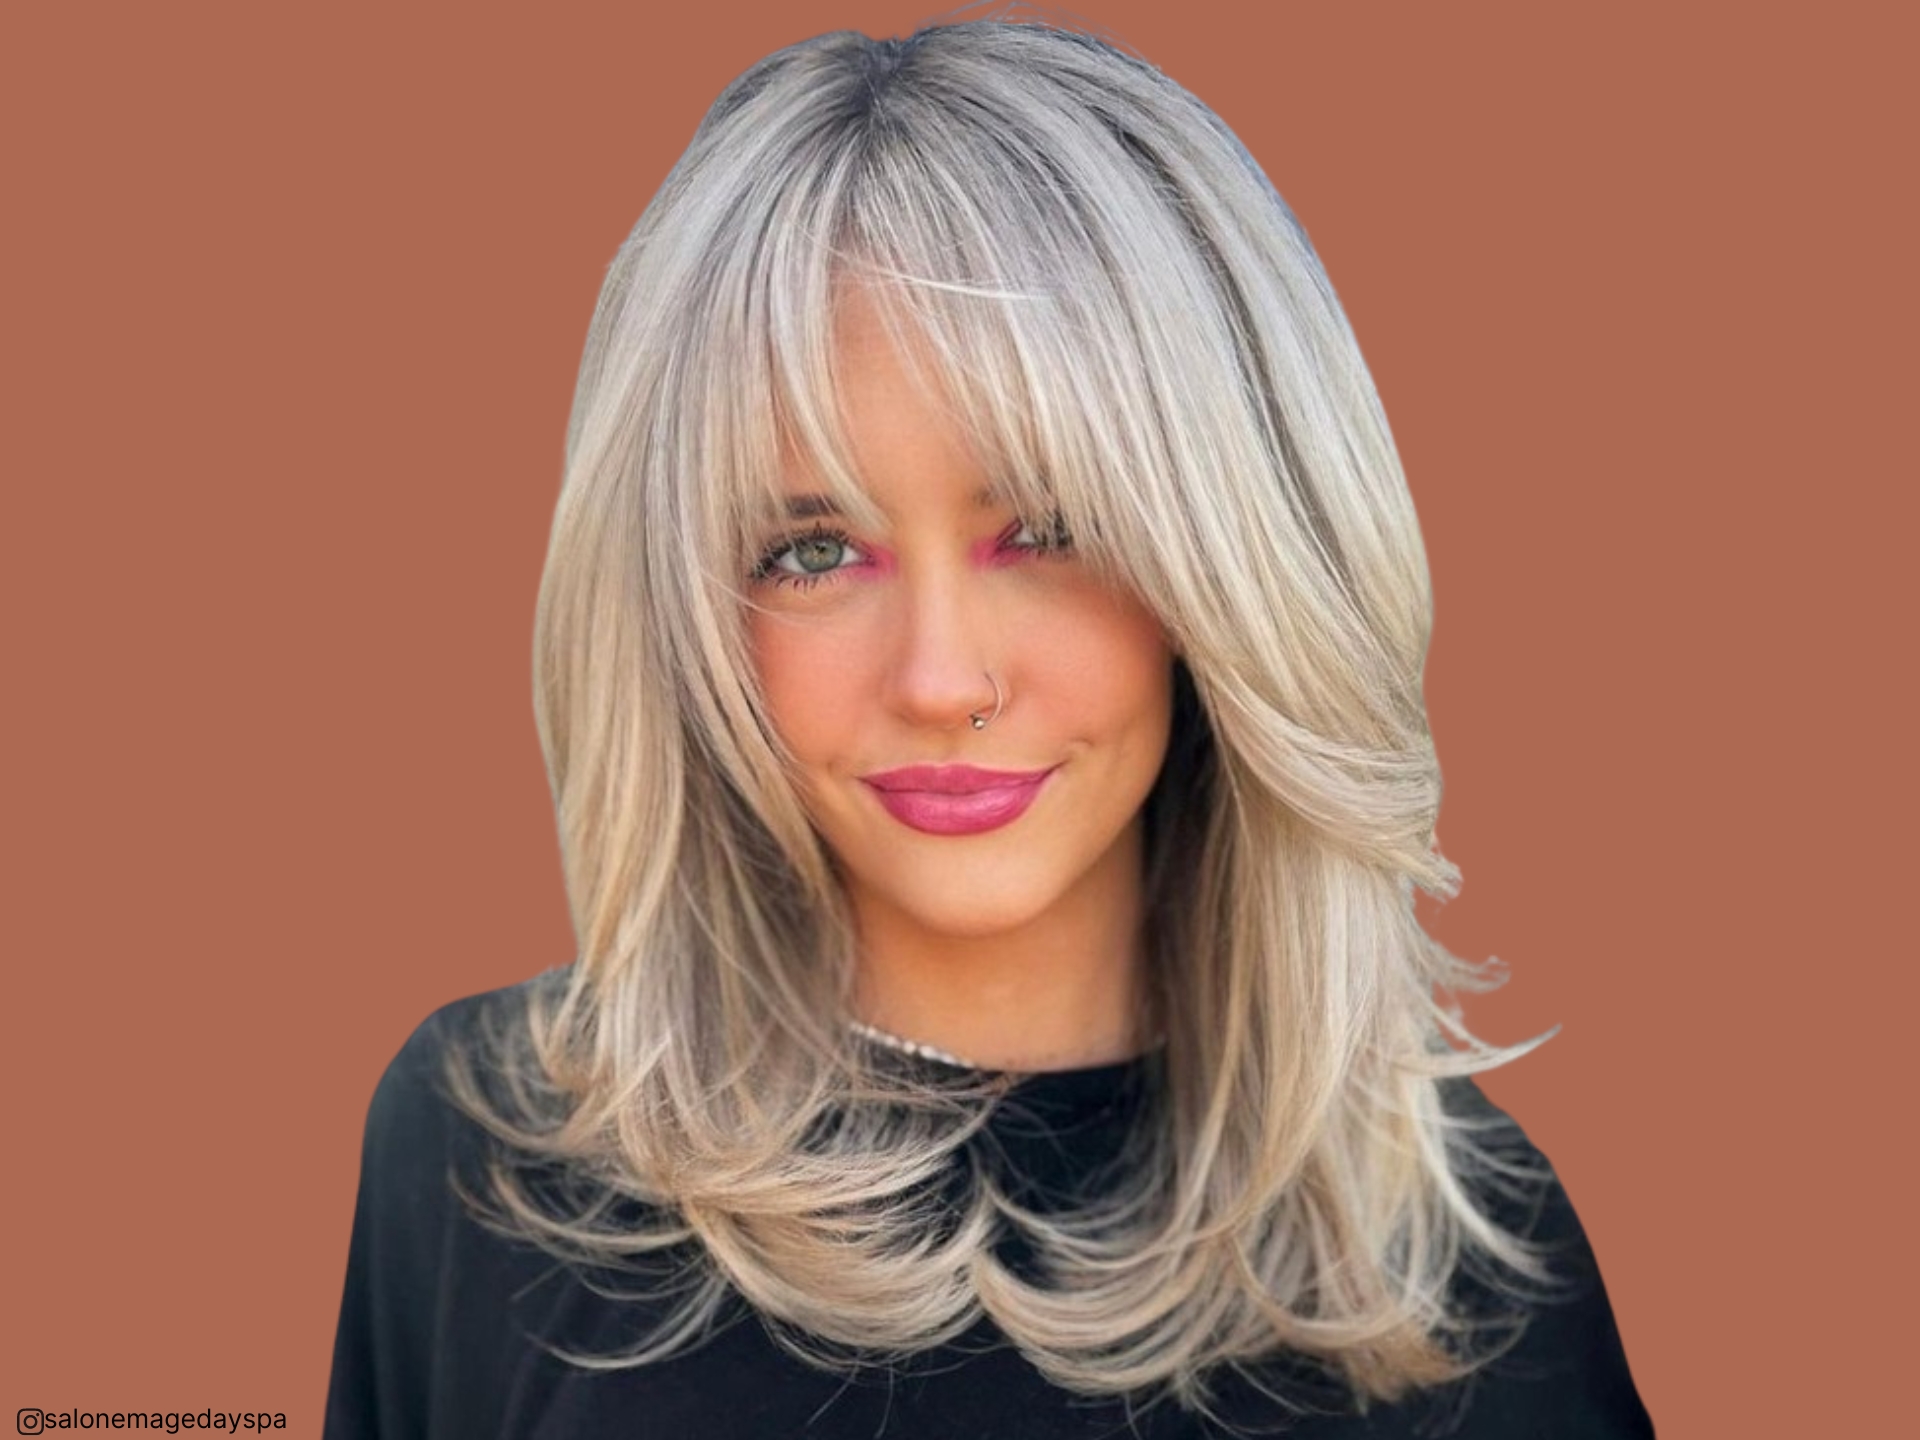 Layered Hair With Bangs Is About To Take The Street Style Scene By Storm